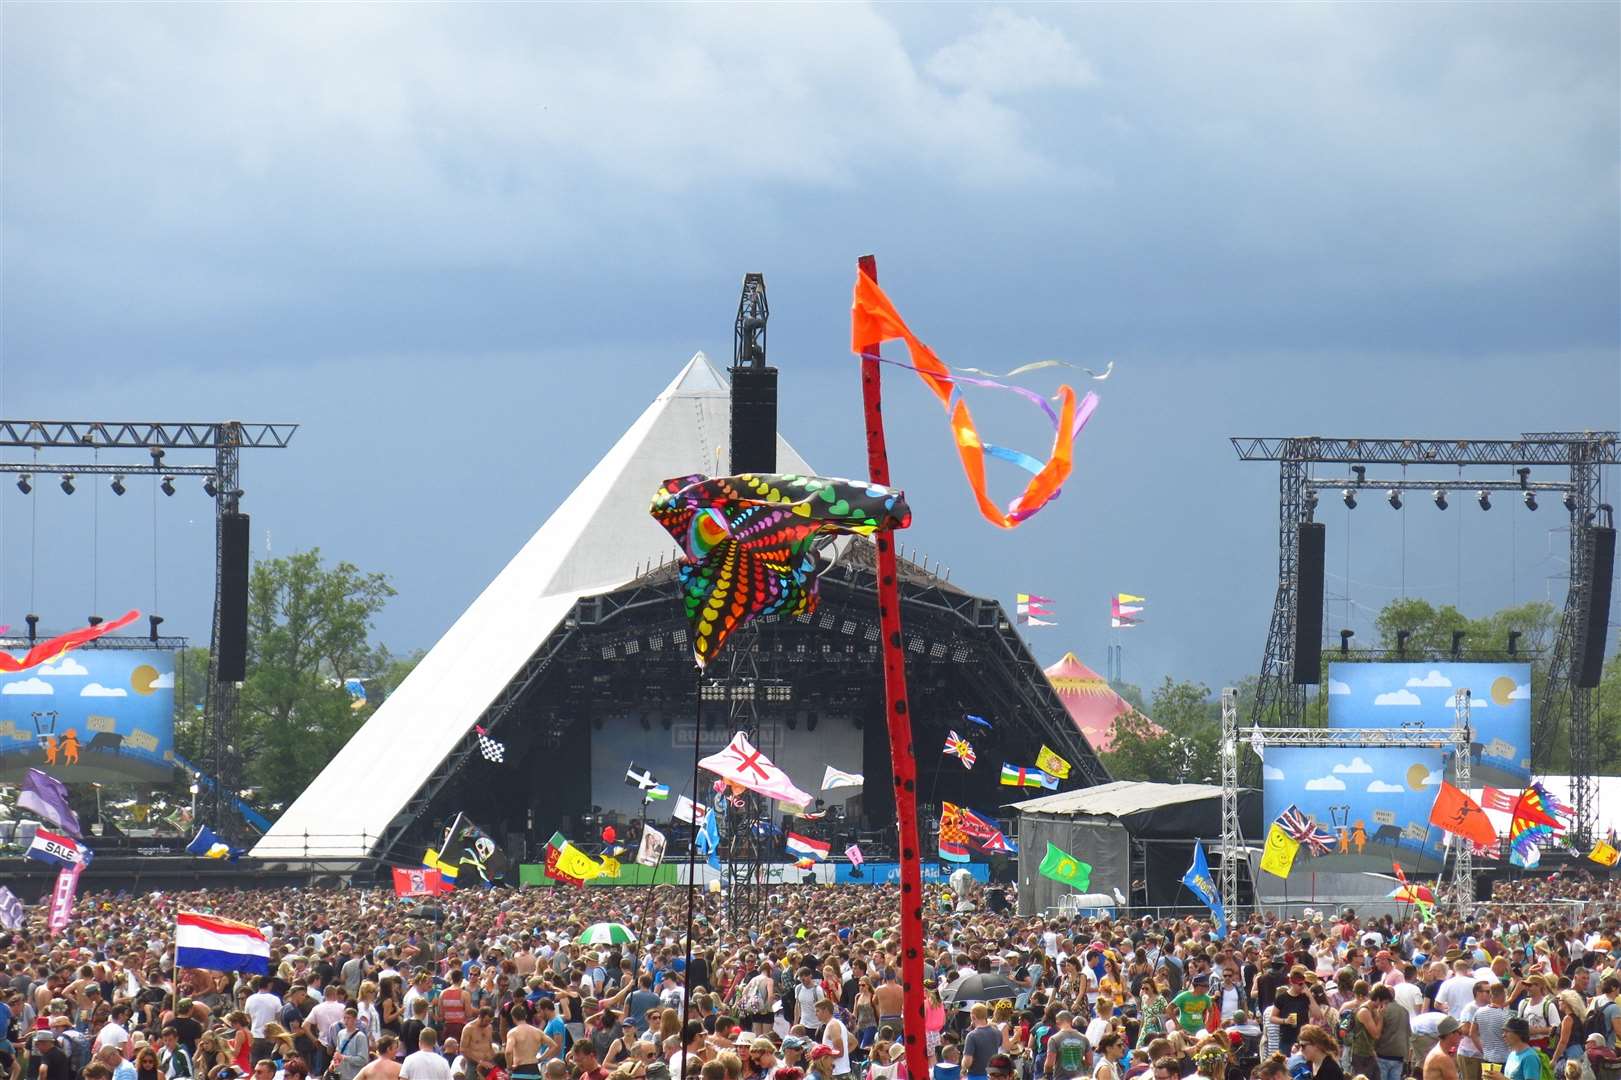 The Pyramid Stage has hosted the likes of Radiohead, Adele and Lionel Richie